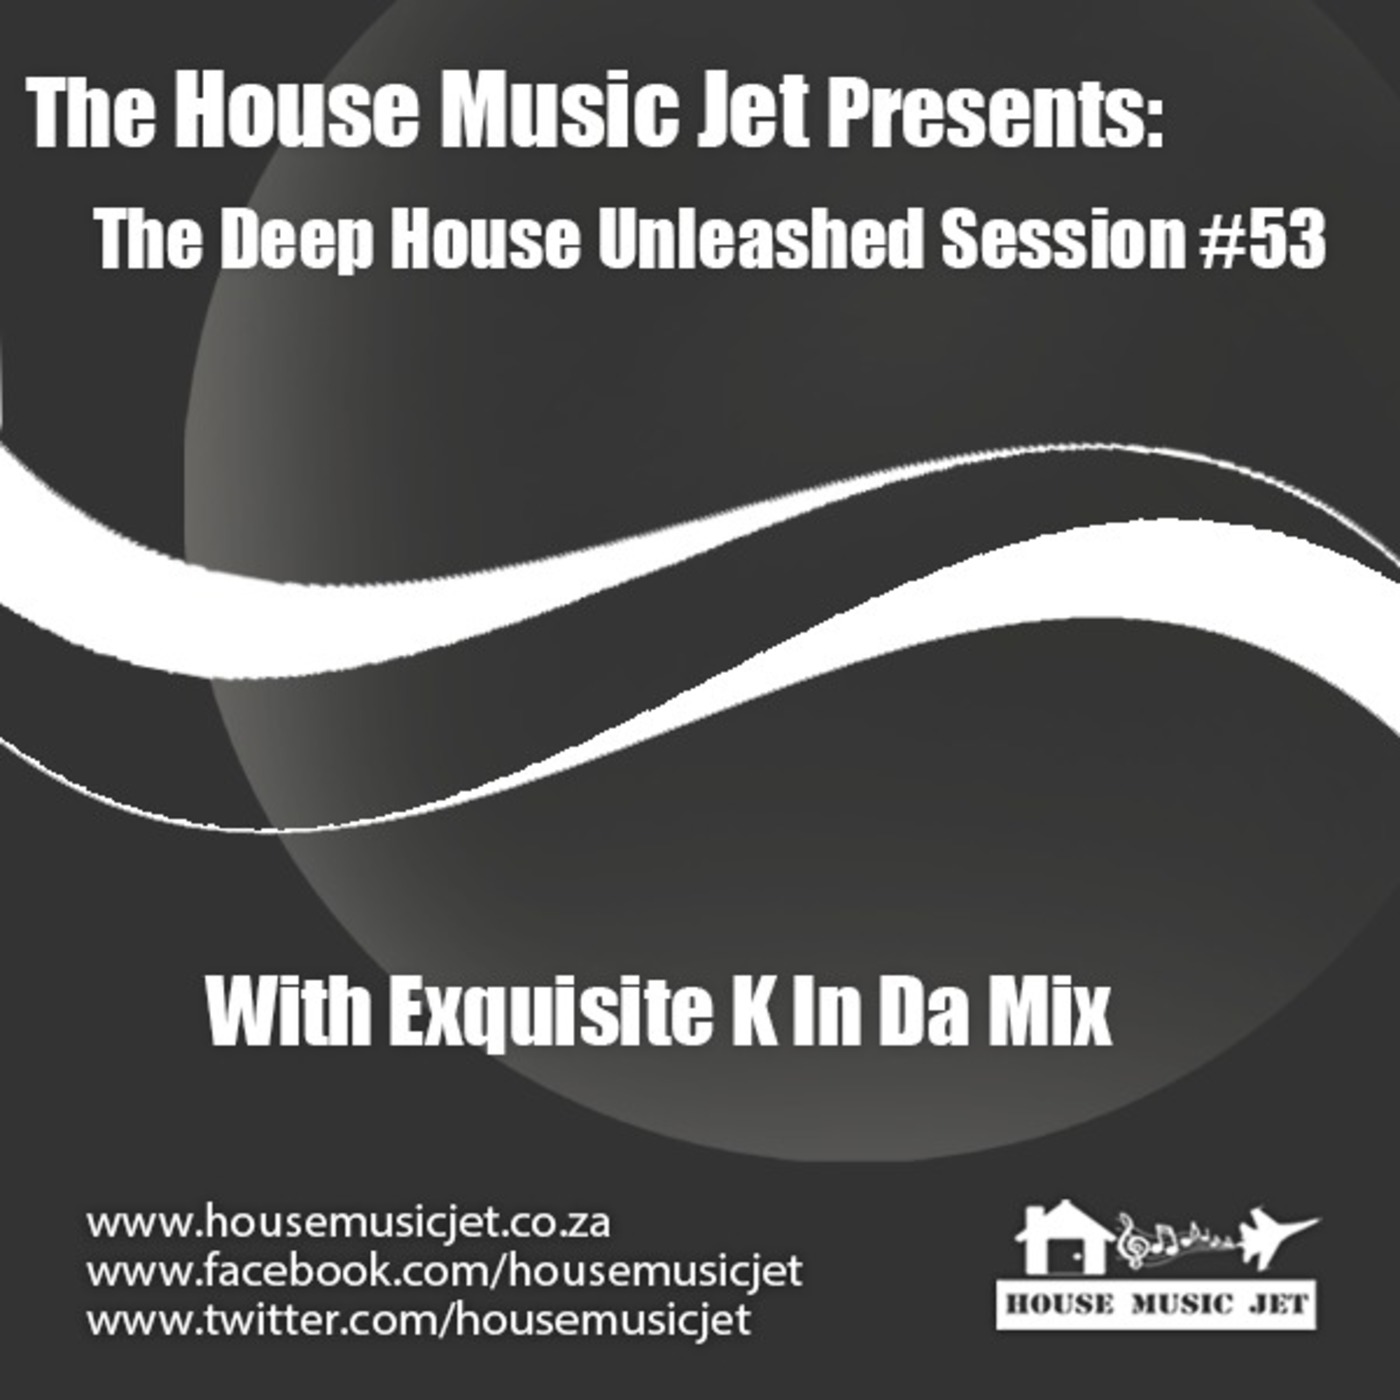 Exquisite K In Da Mix - Deep House Unleashed Session 53